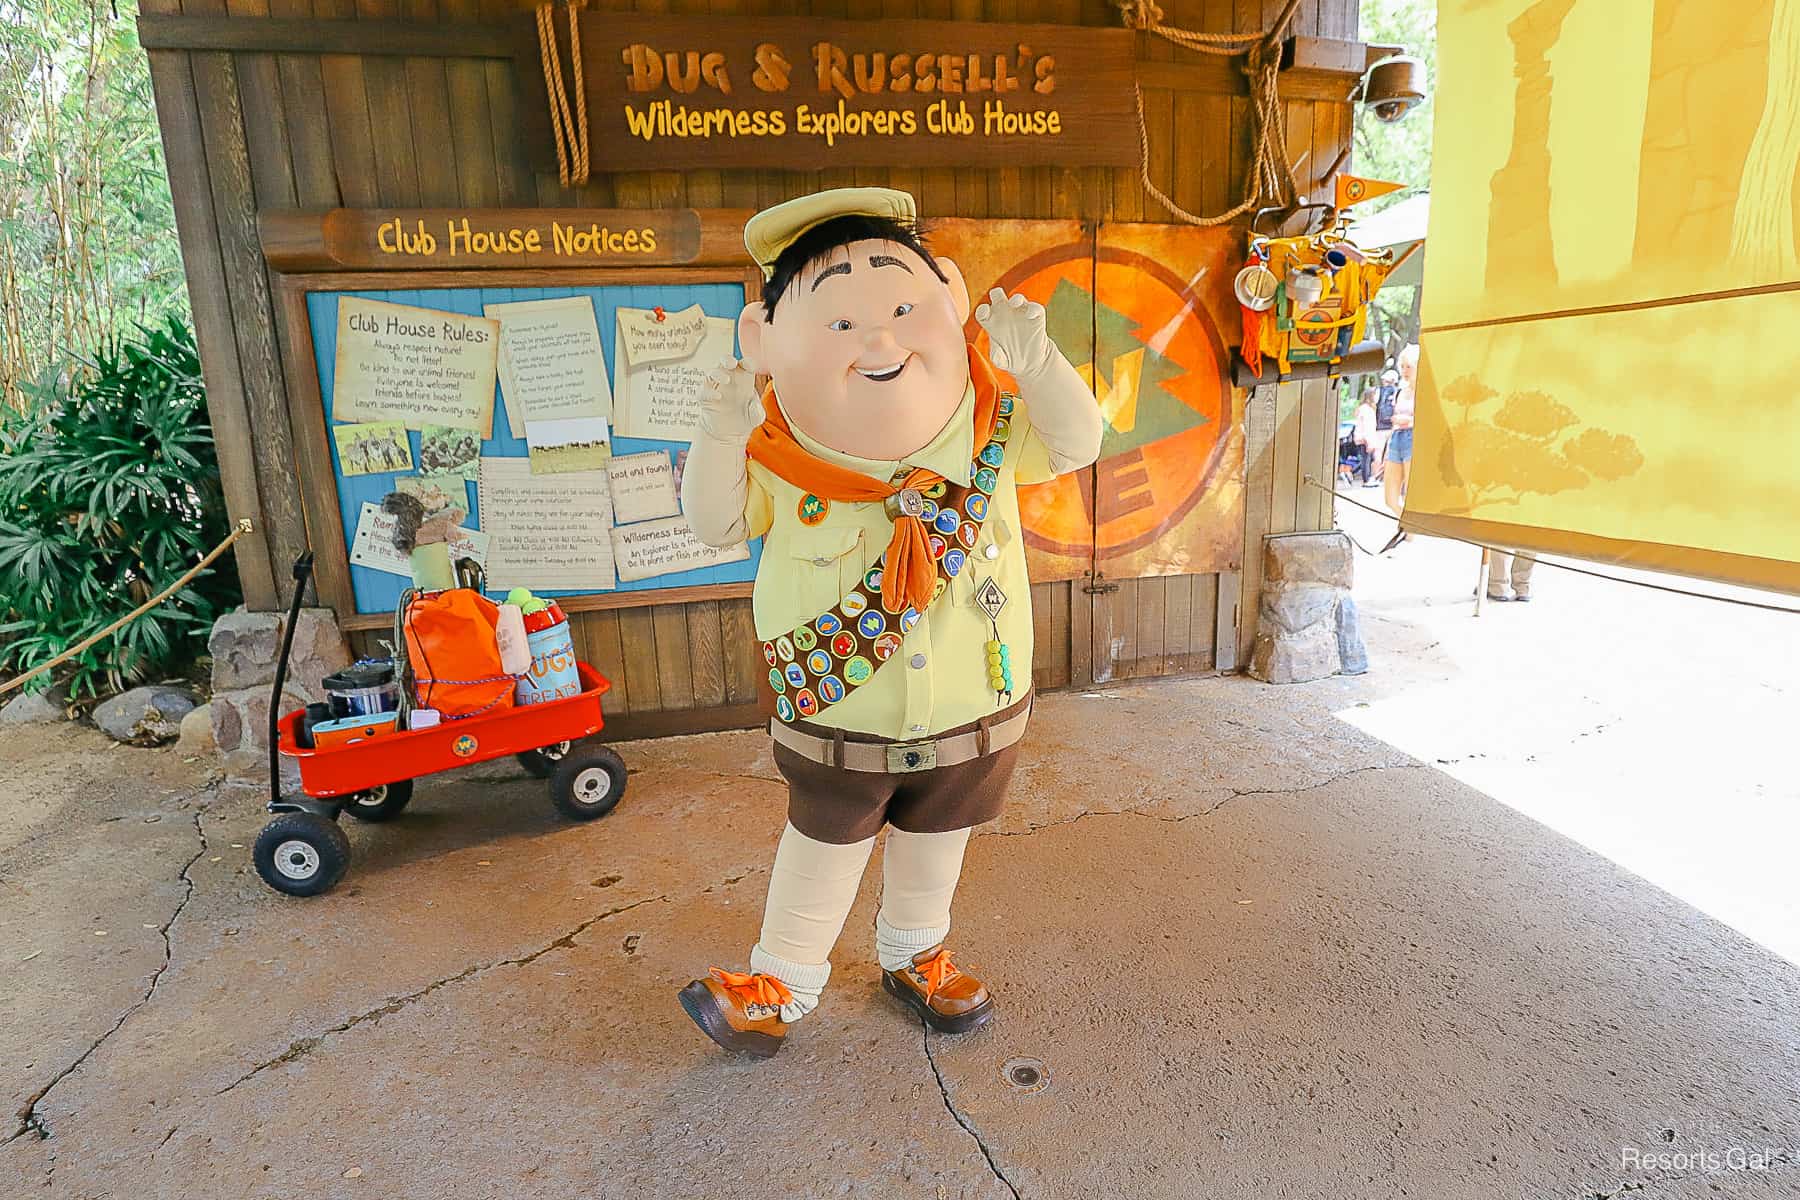 Russell posing for a photo with his foot kicked up and making the Wilderness Explorer sign. 